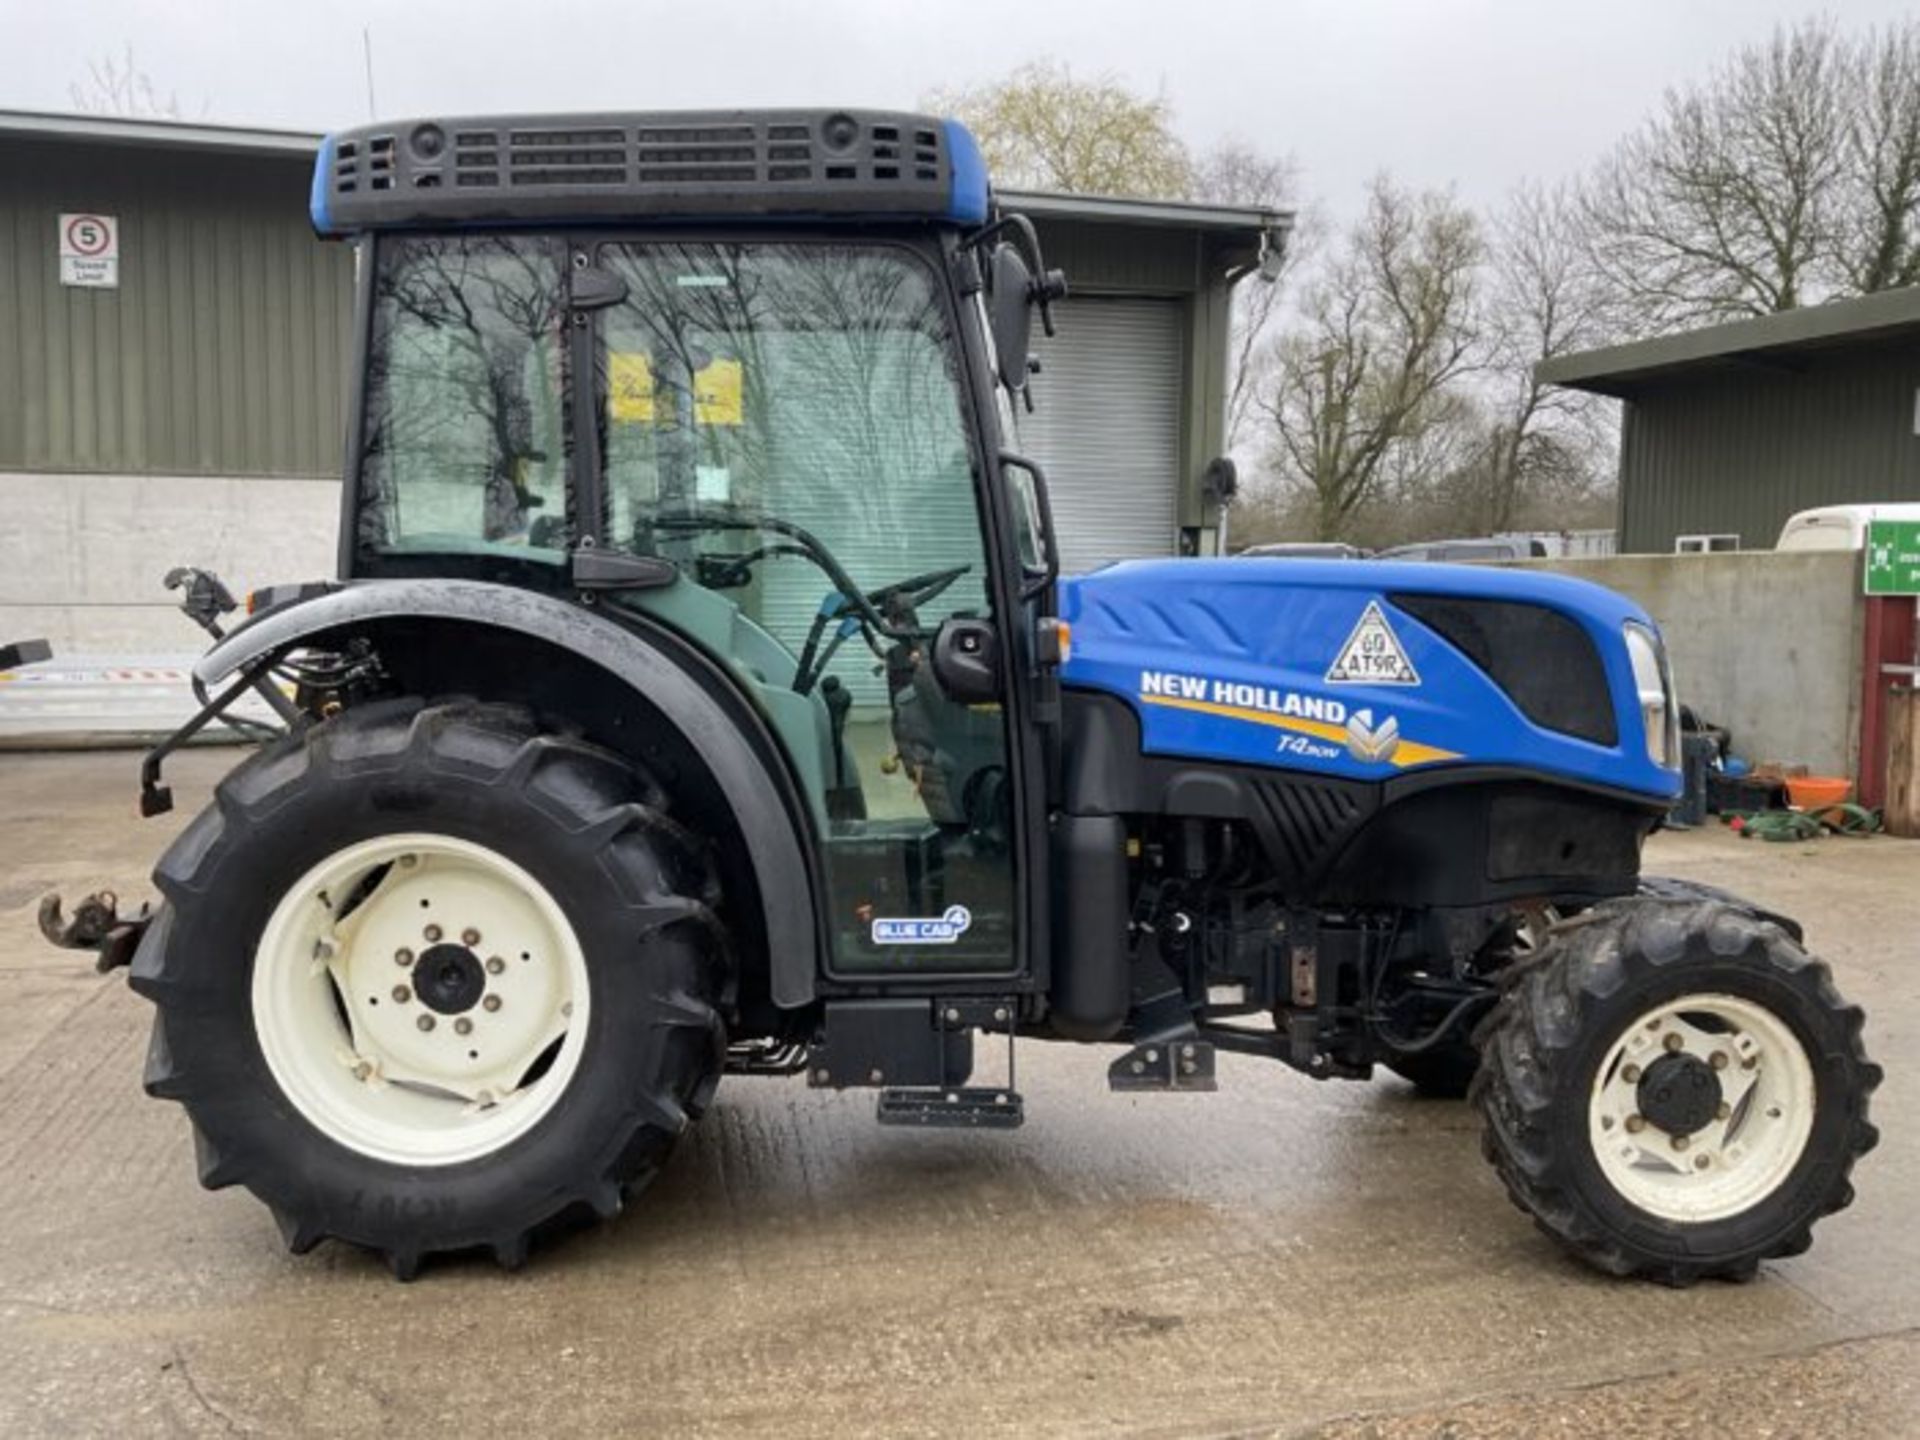 YEAR 2018 NEW HOLLAND T4.90N. FRONT WEIGHTS. 4 SPOOLS - Image 5 of 10